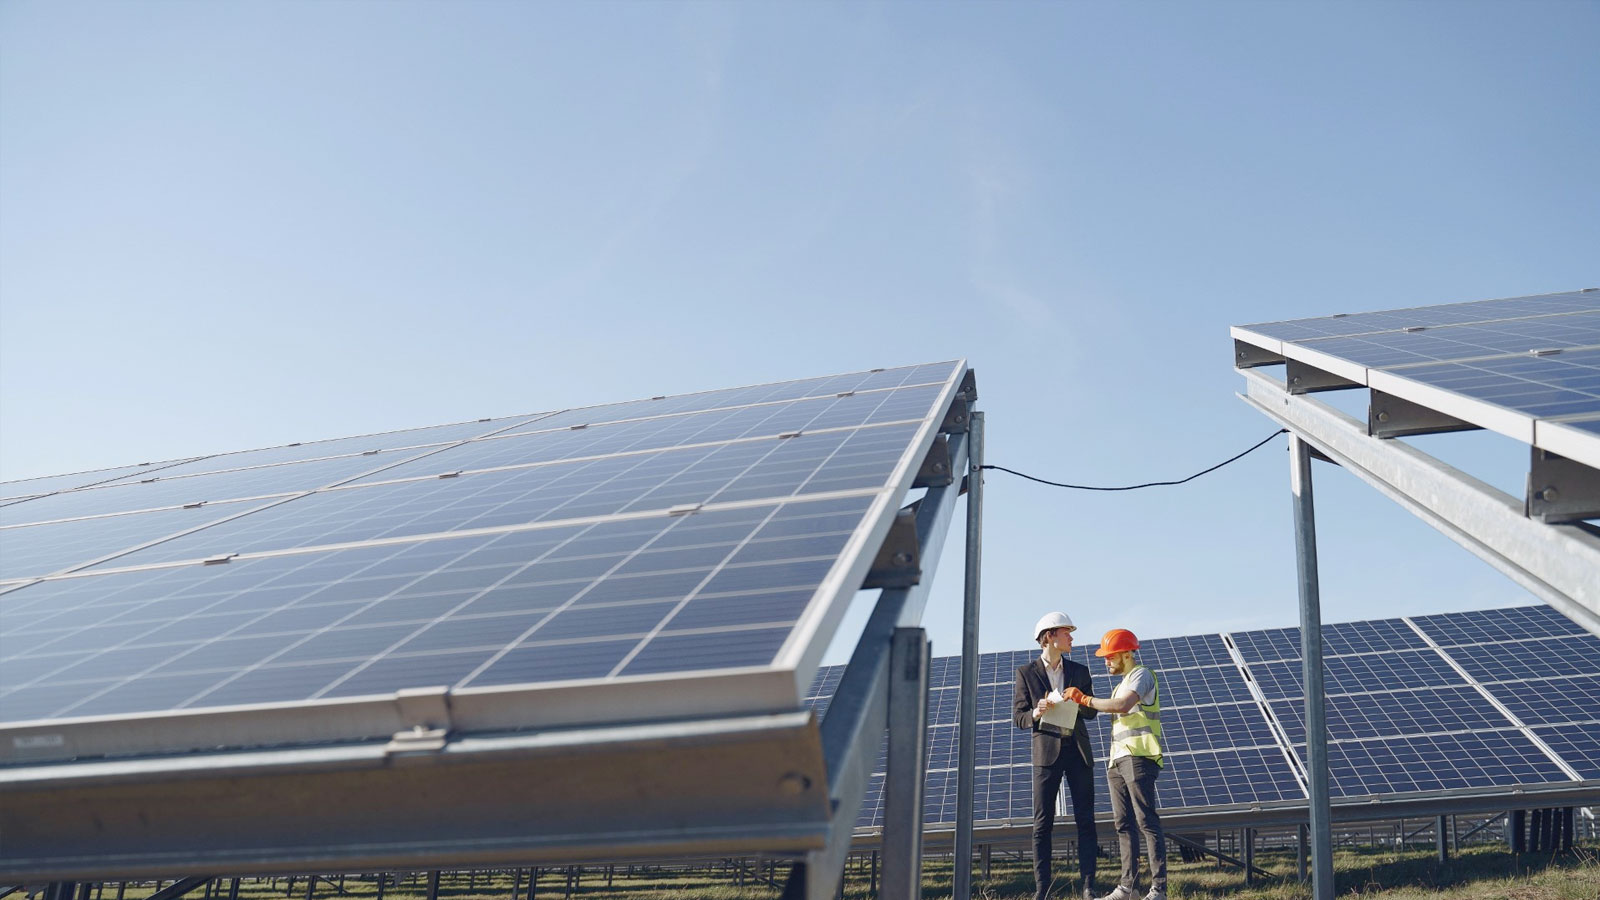 UK Power Networks’ DSO opens up new data to boost renewables